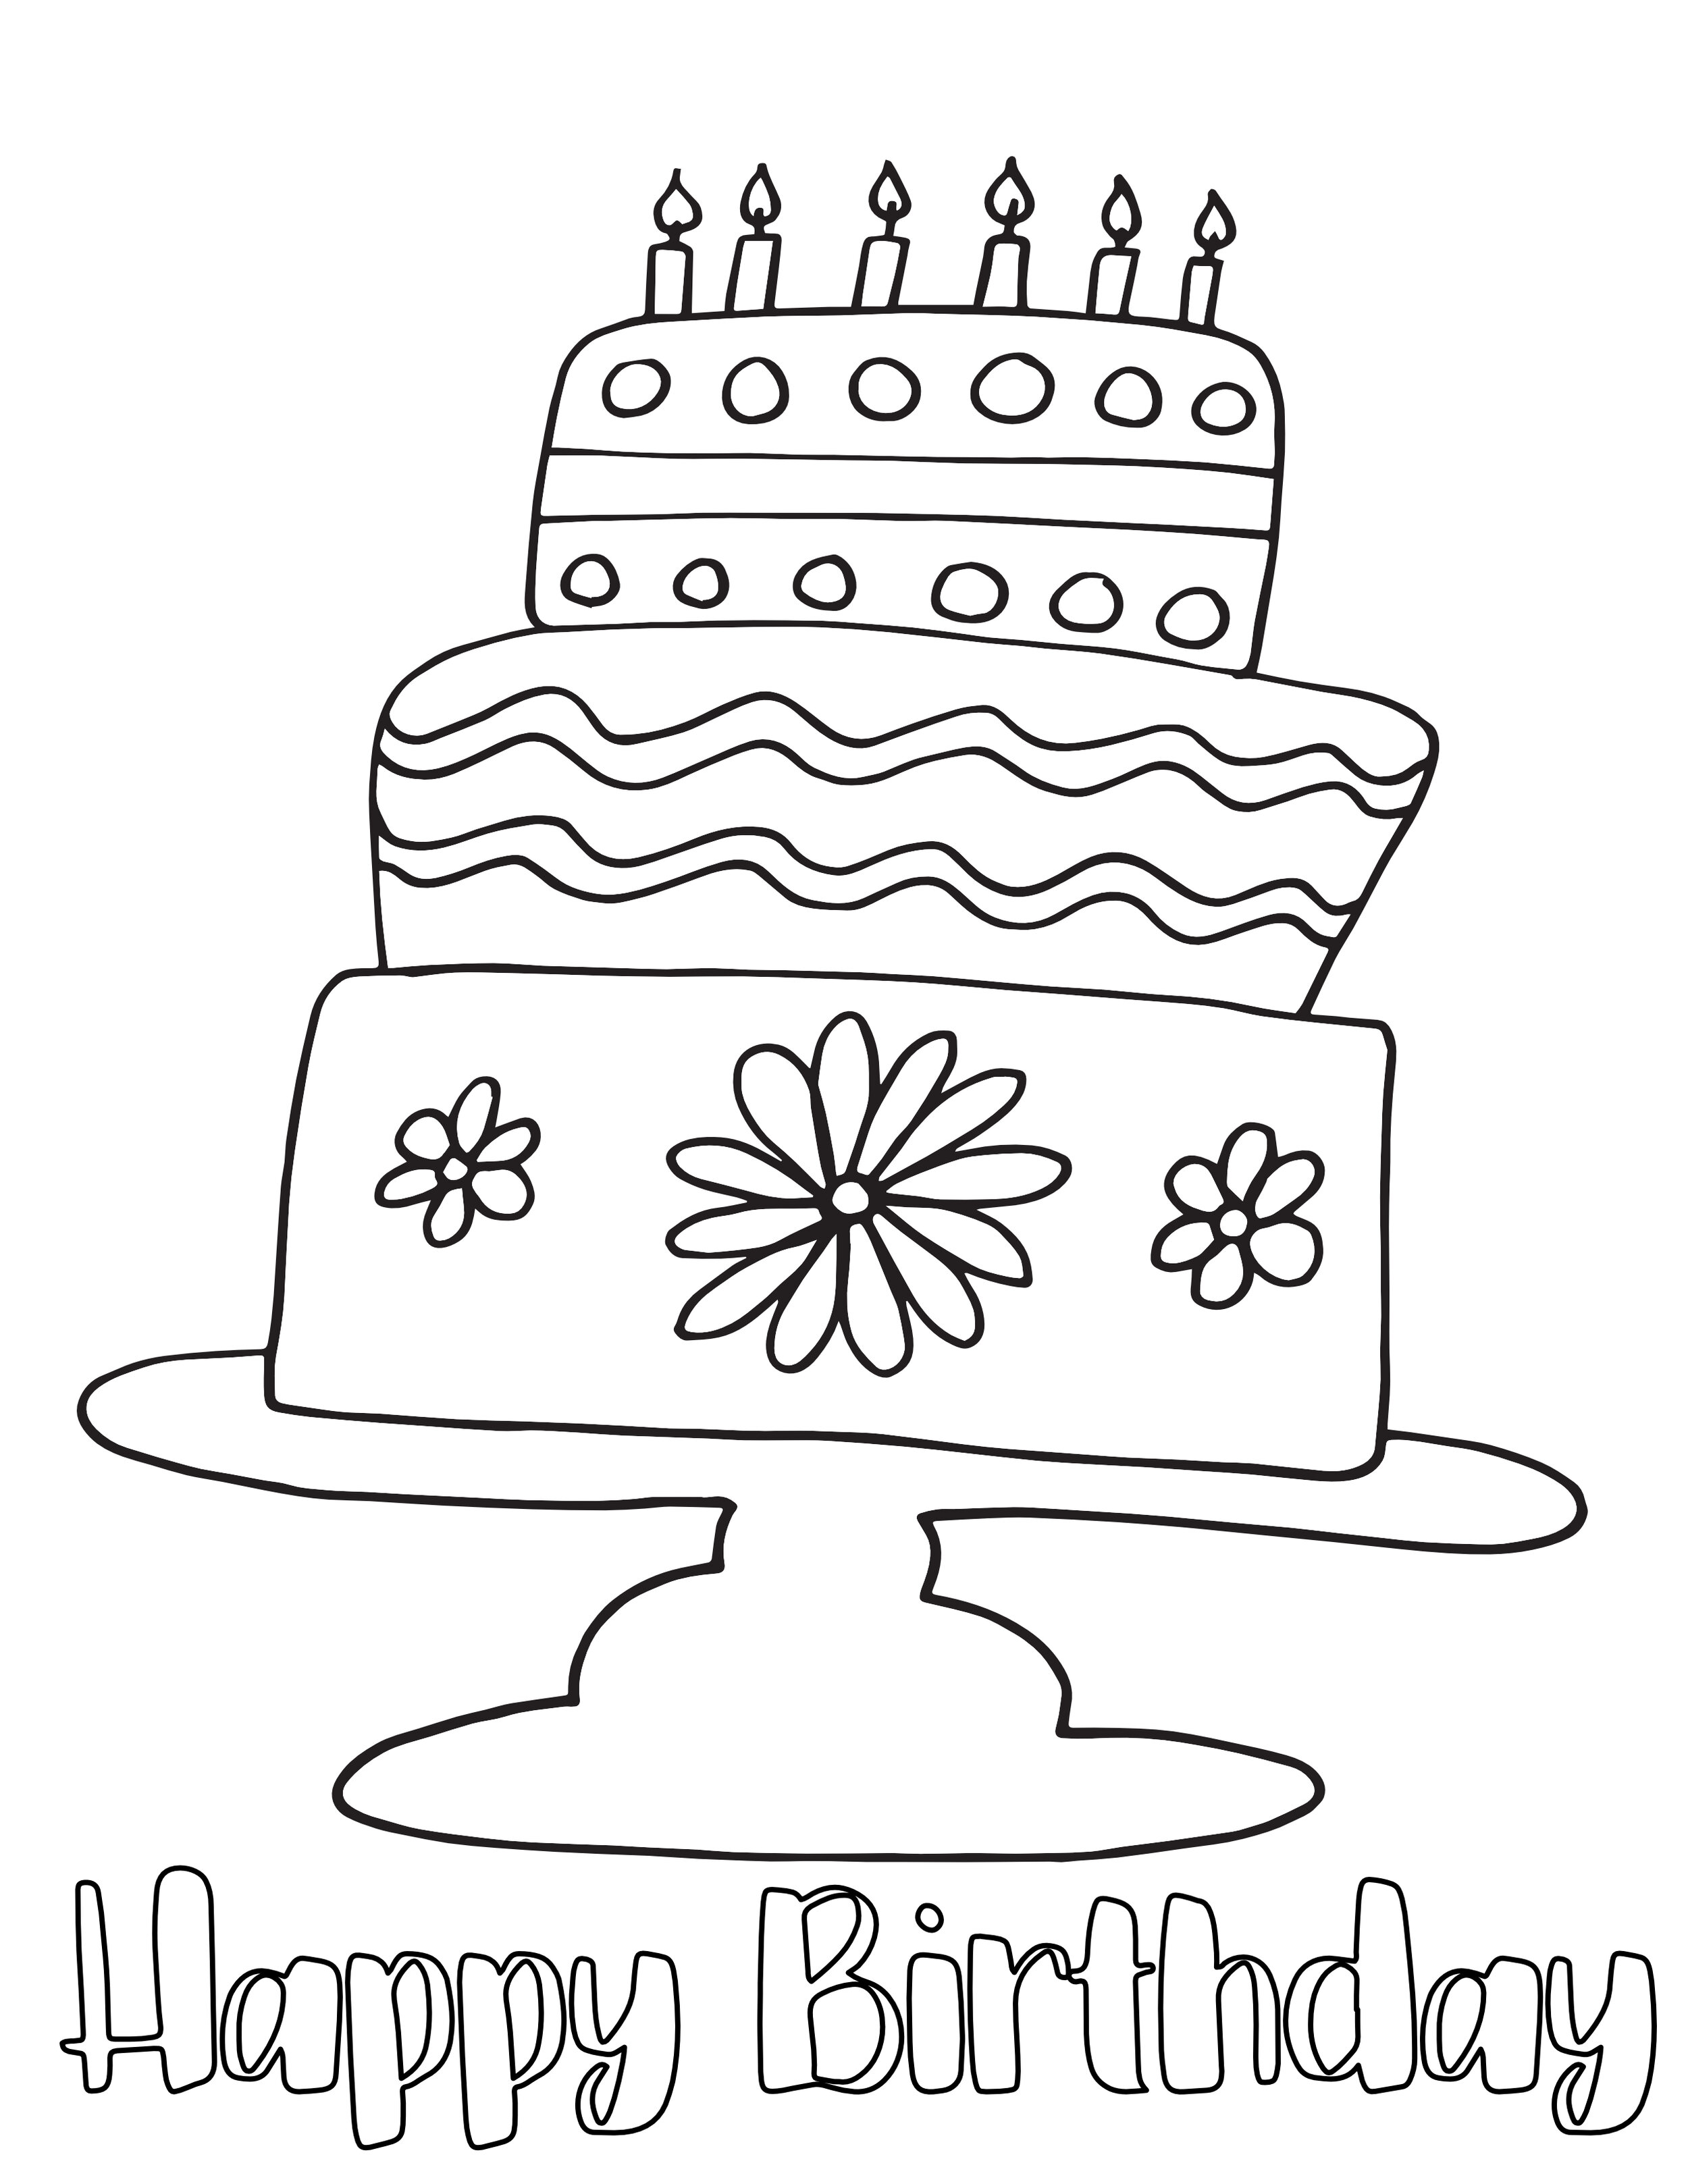 HAPPY BIRTHDAY CAKE   Free Coloring Page — Stevie Doodles Free ...